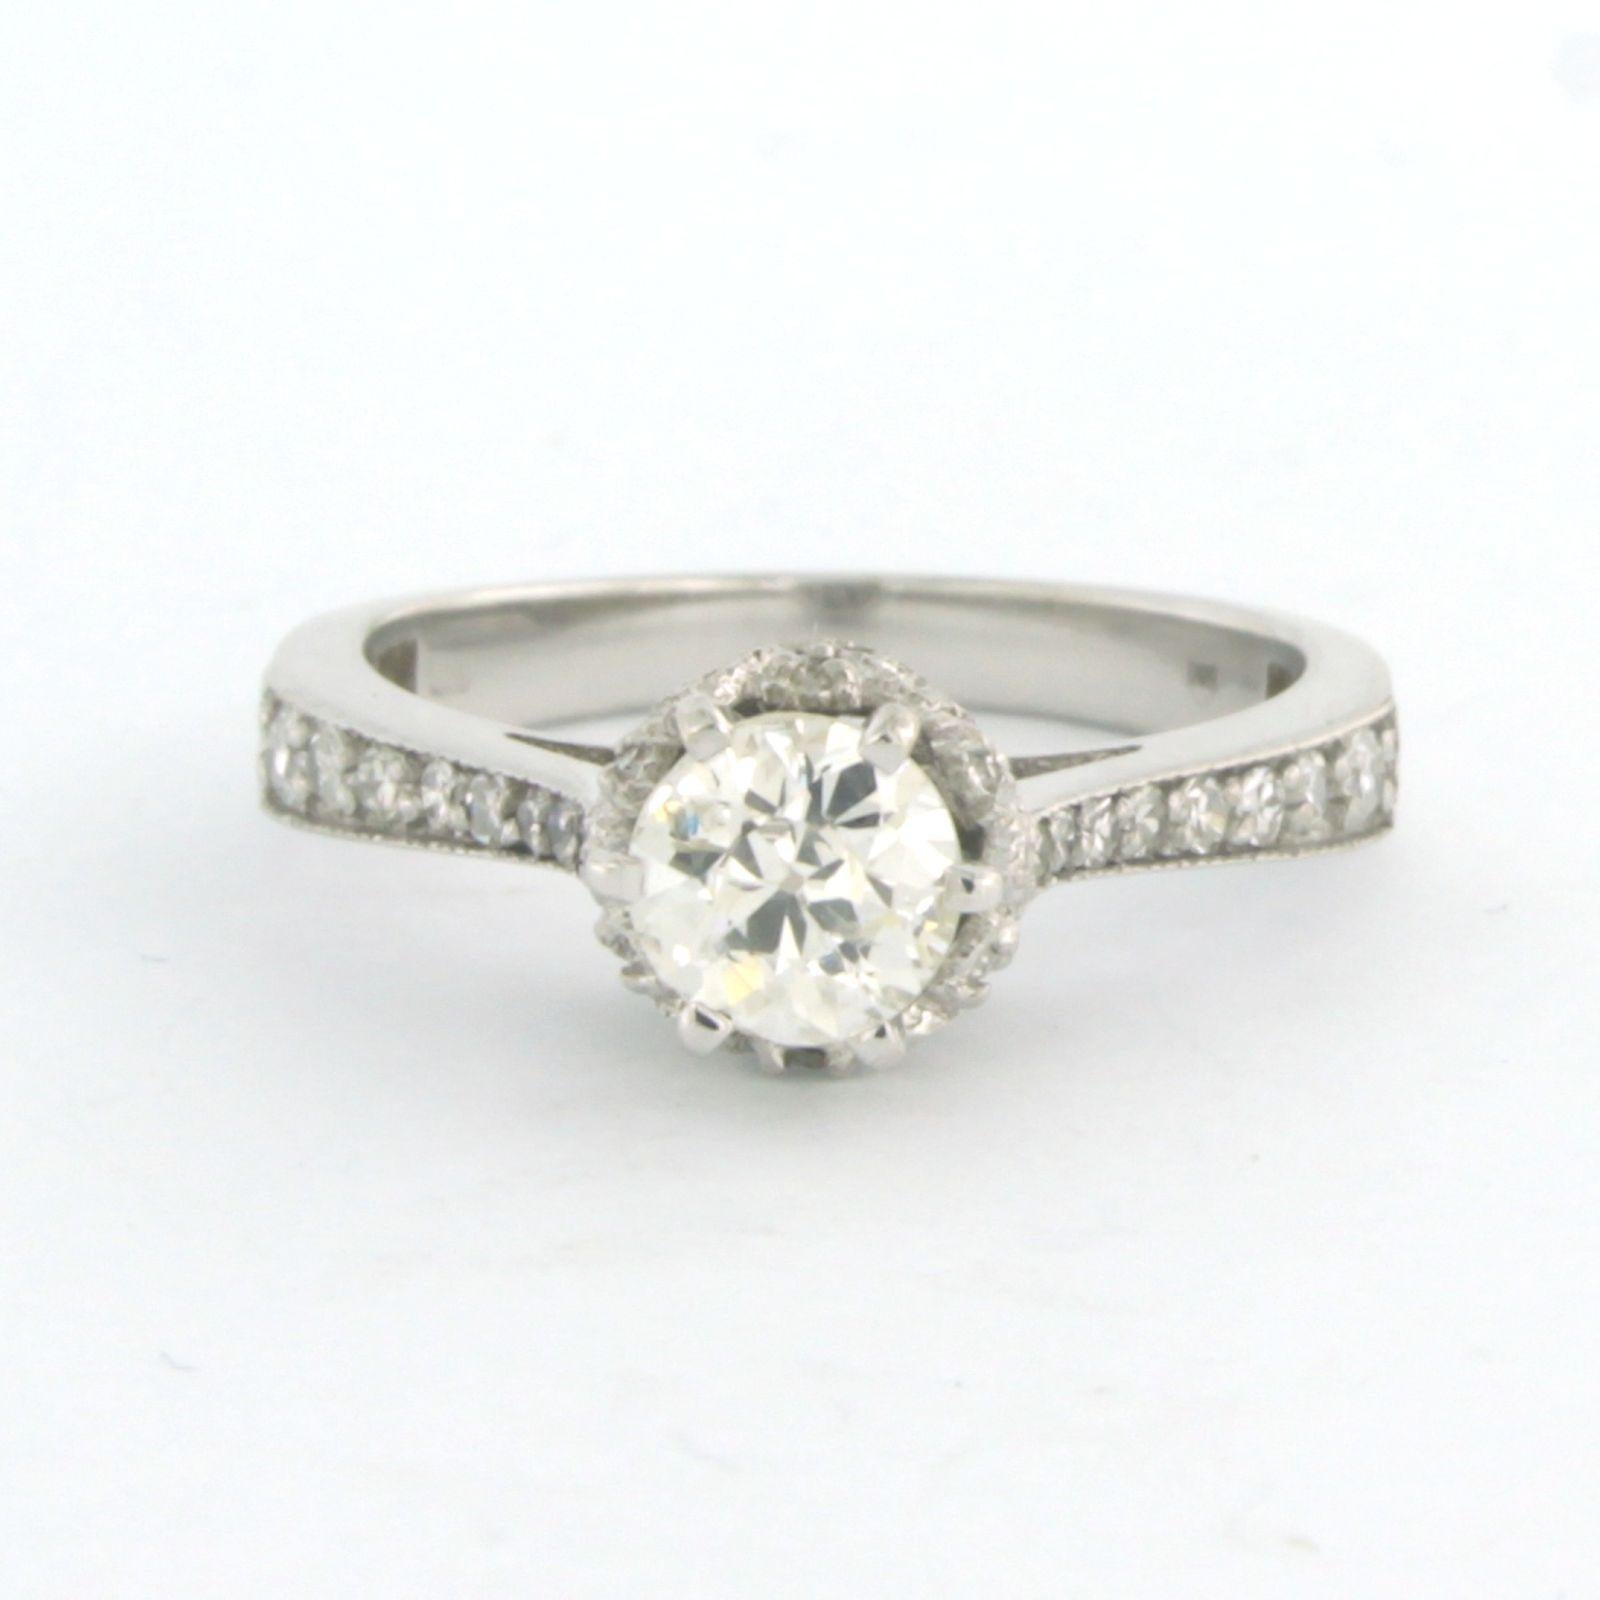 14k white gold ring set with old mine cut diamond. 1.00ct - J/K, F/G - VS/SI - ring size U.S. 7 - EU. 17.25(54)

detailed description:

the front of the ring is 7.5 mm wide by 9.5 mm high

Ring size U.S. 7 - EU. 17.25(54), ring can be enlarged or